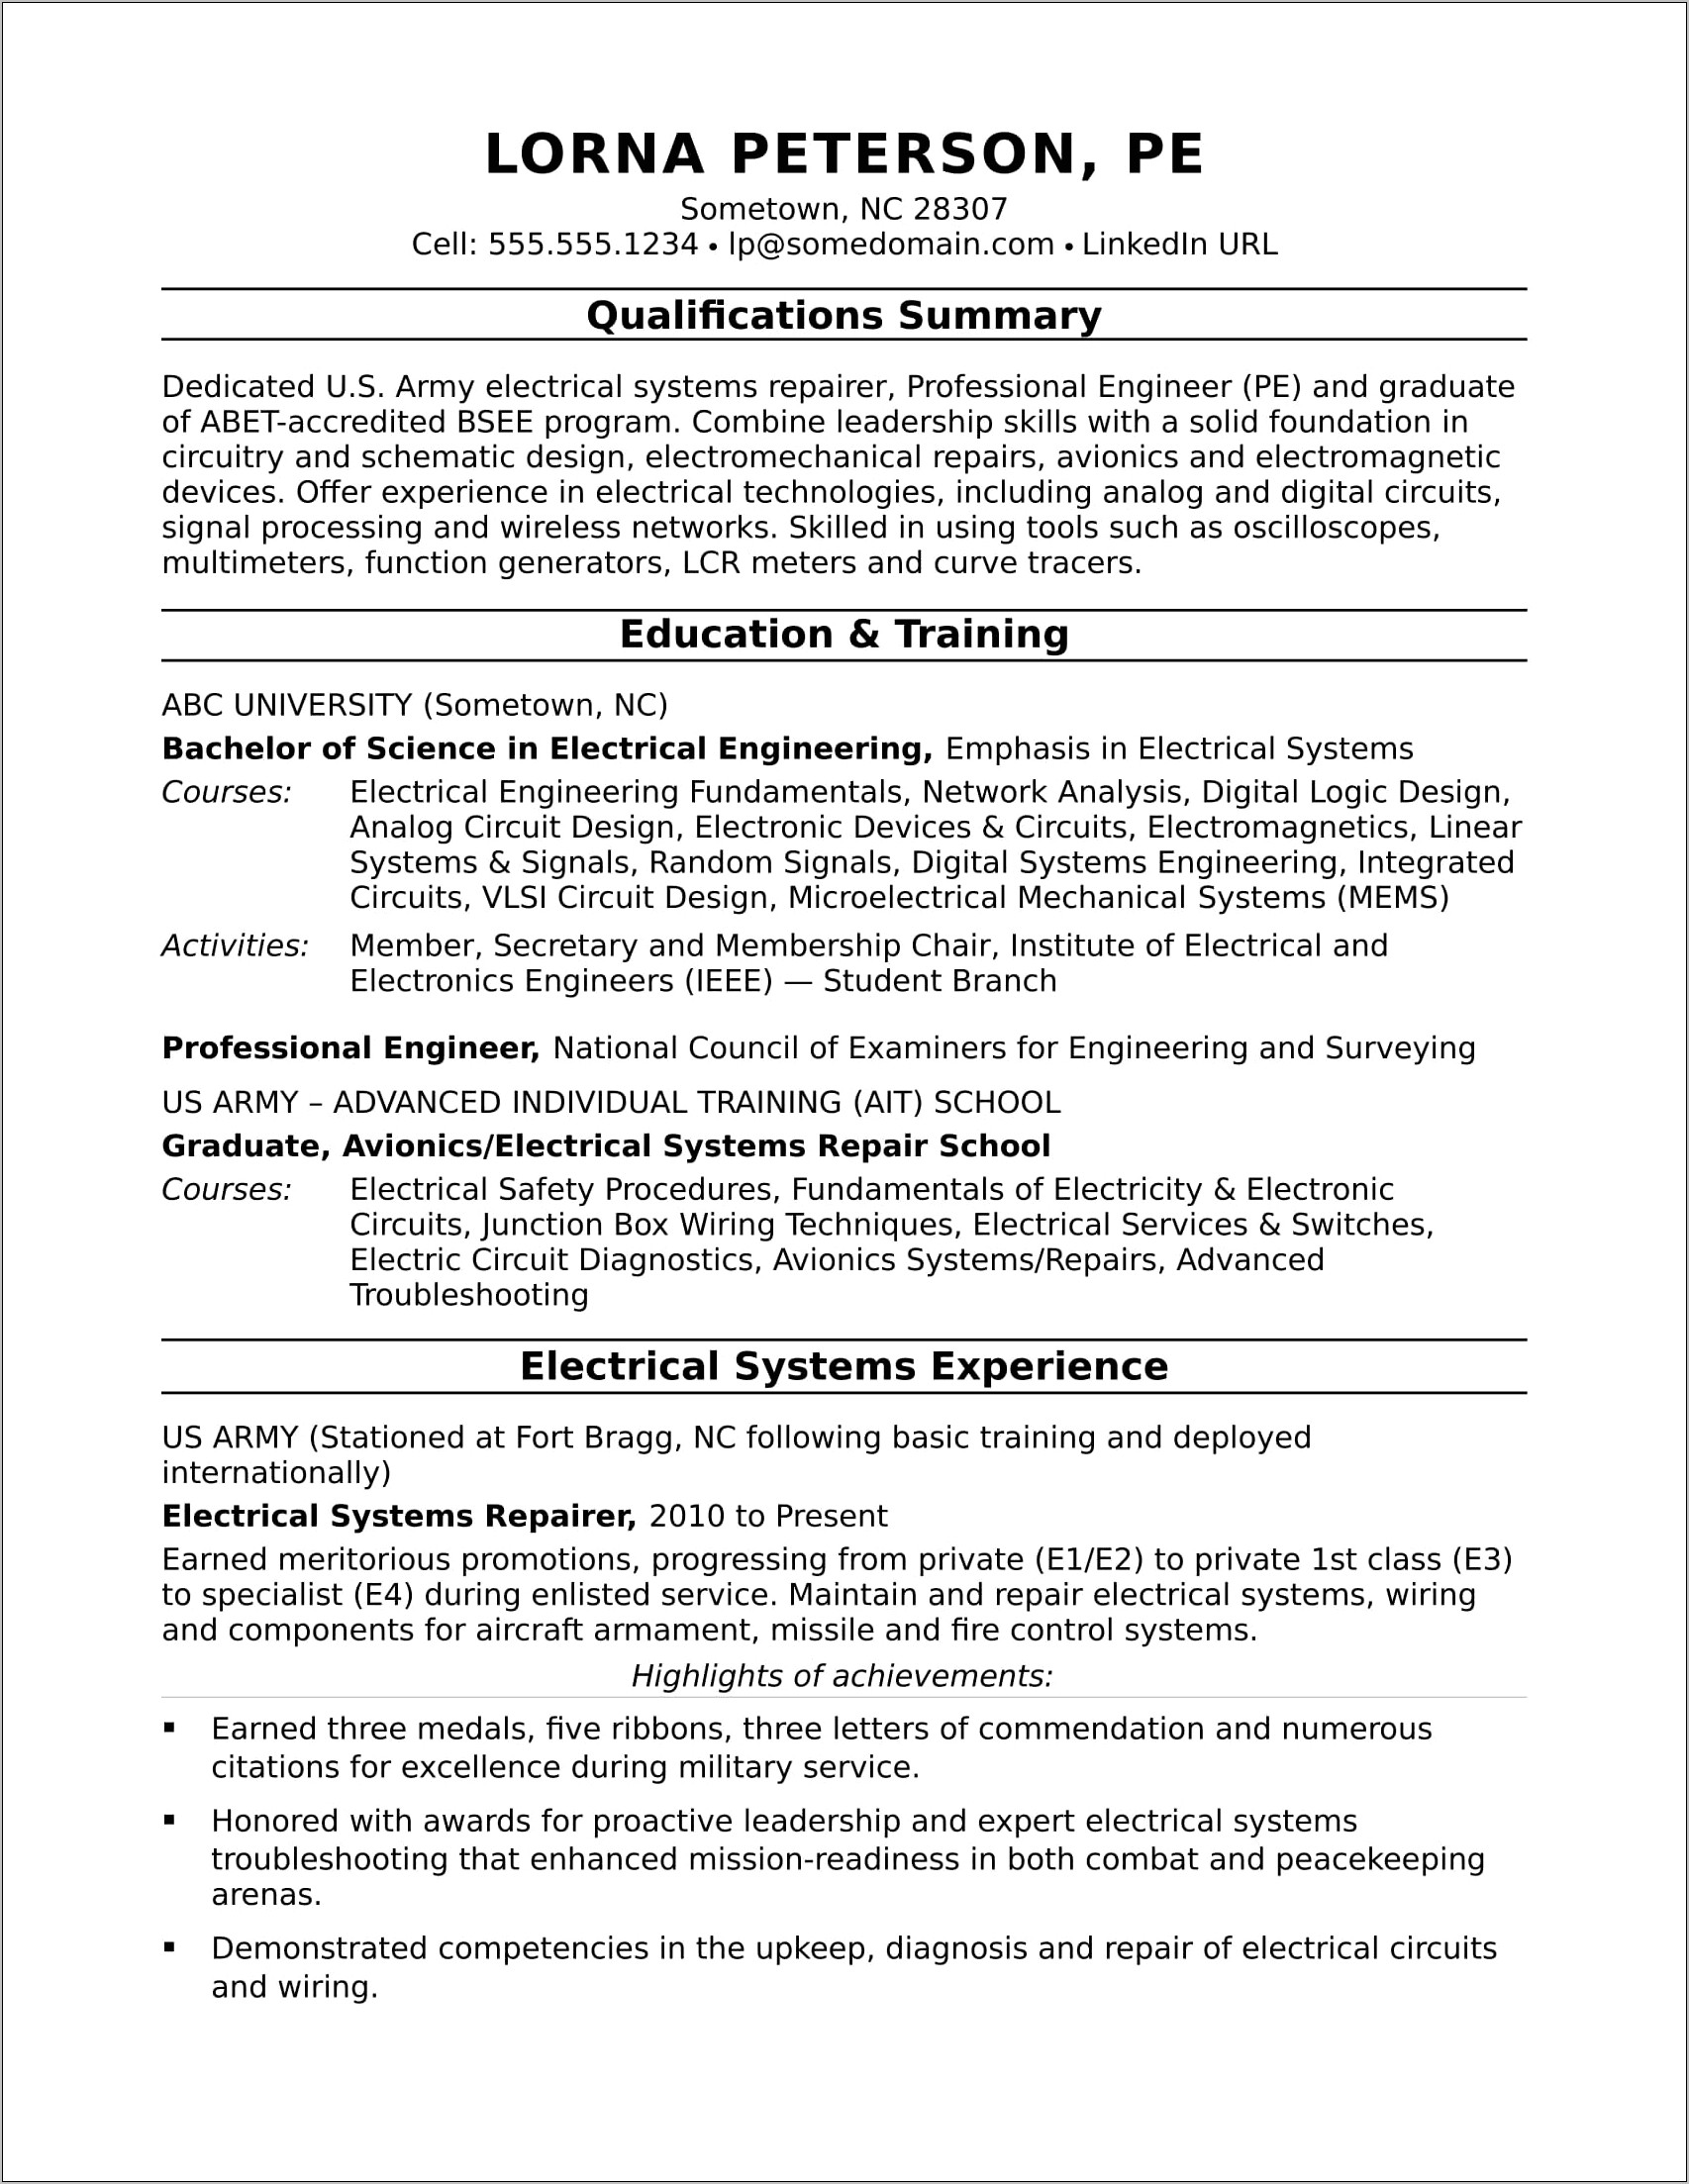 Profile Summary In Resume For Experienced Engineer